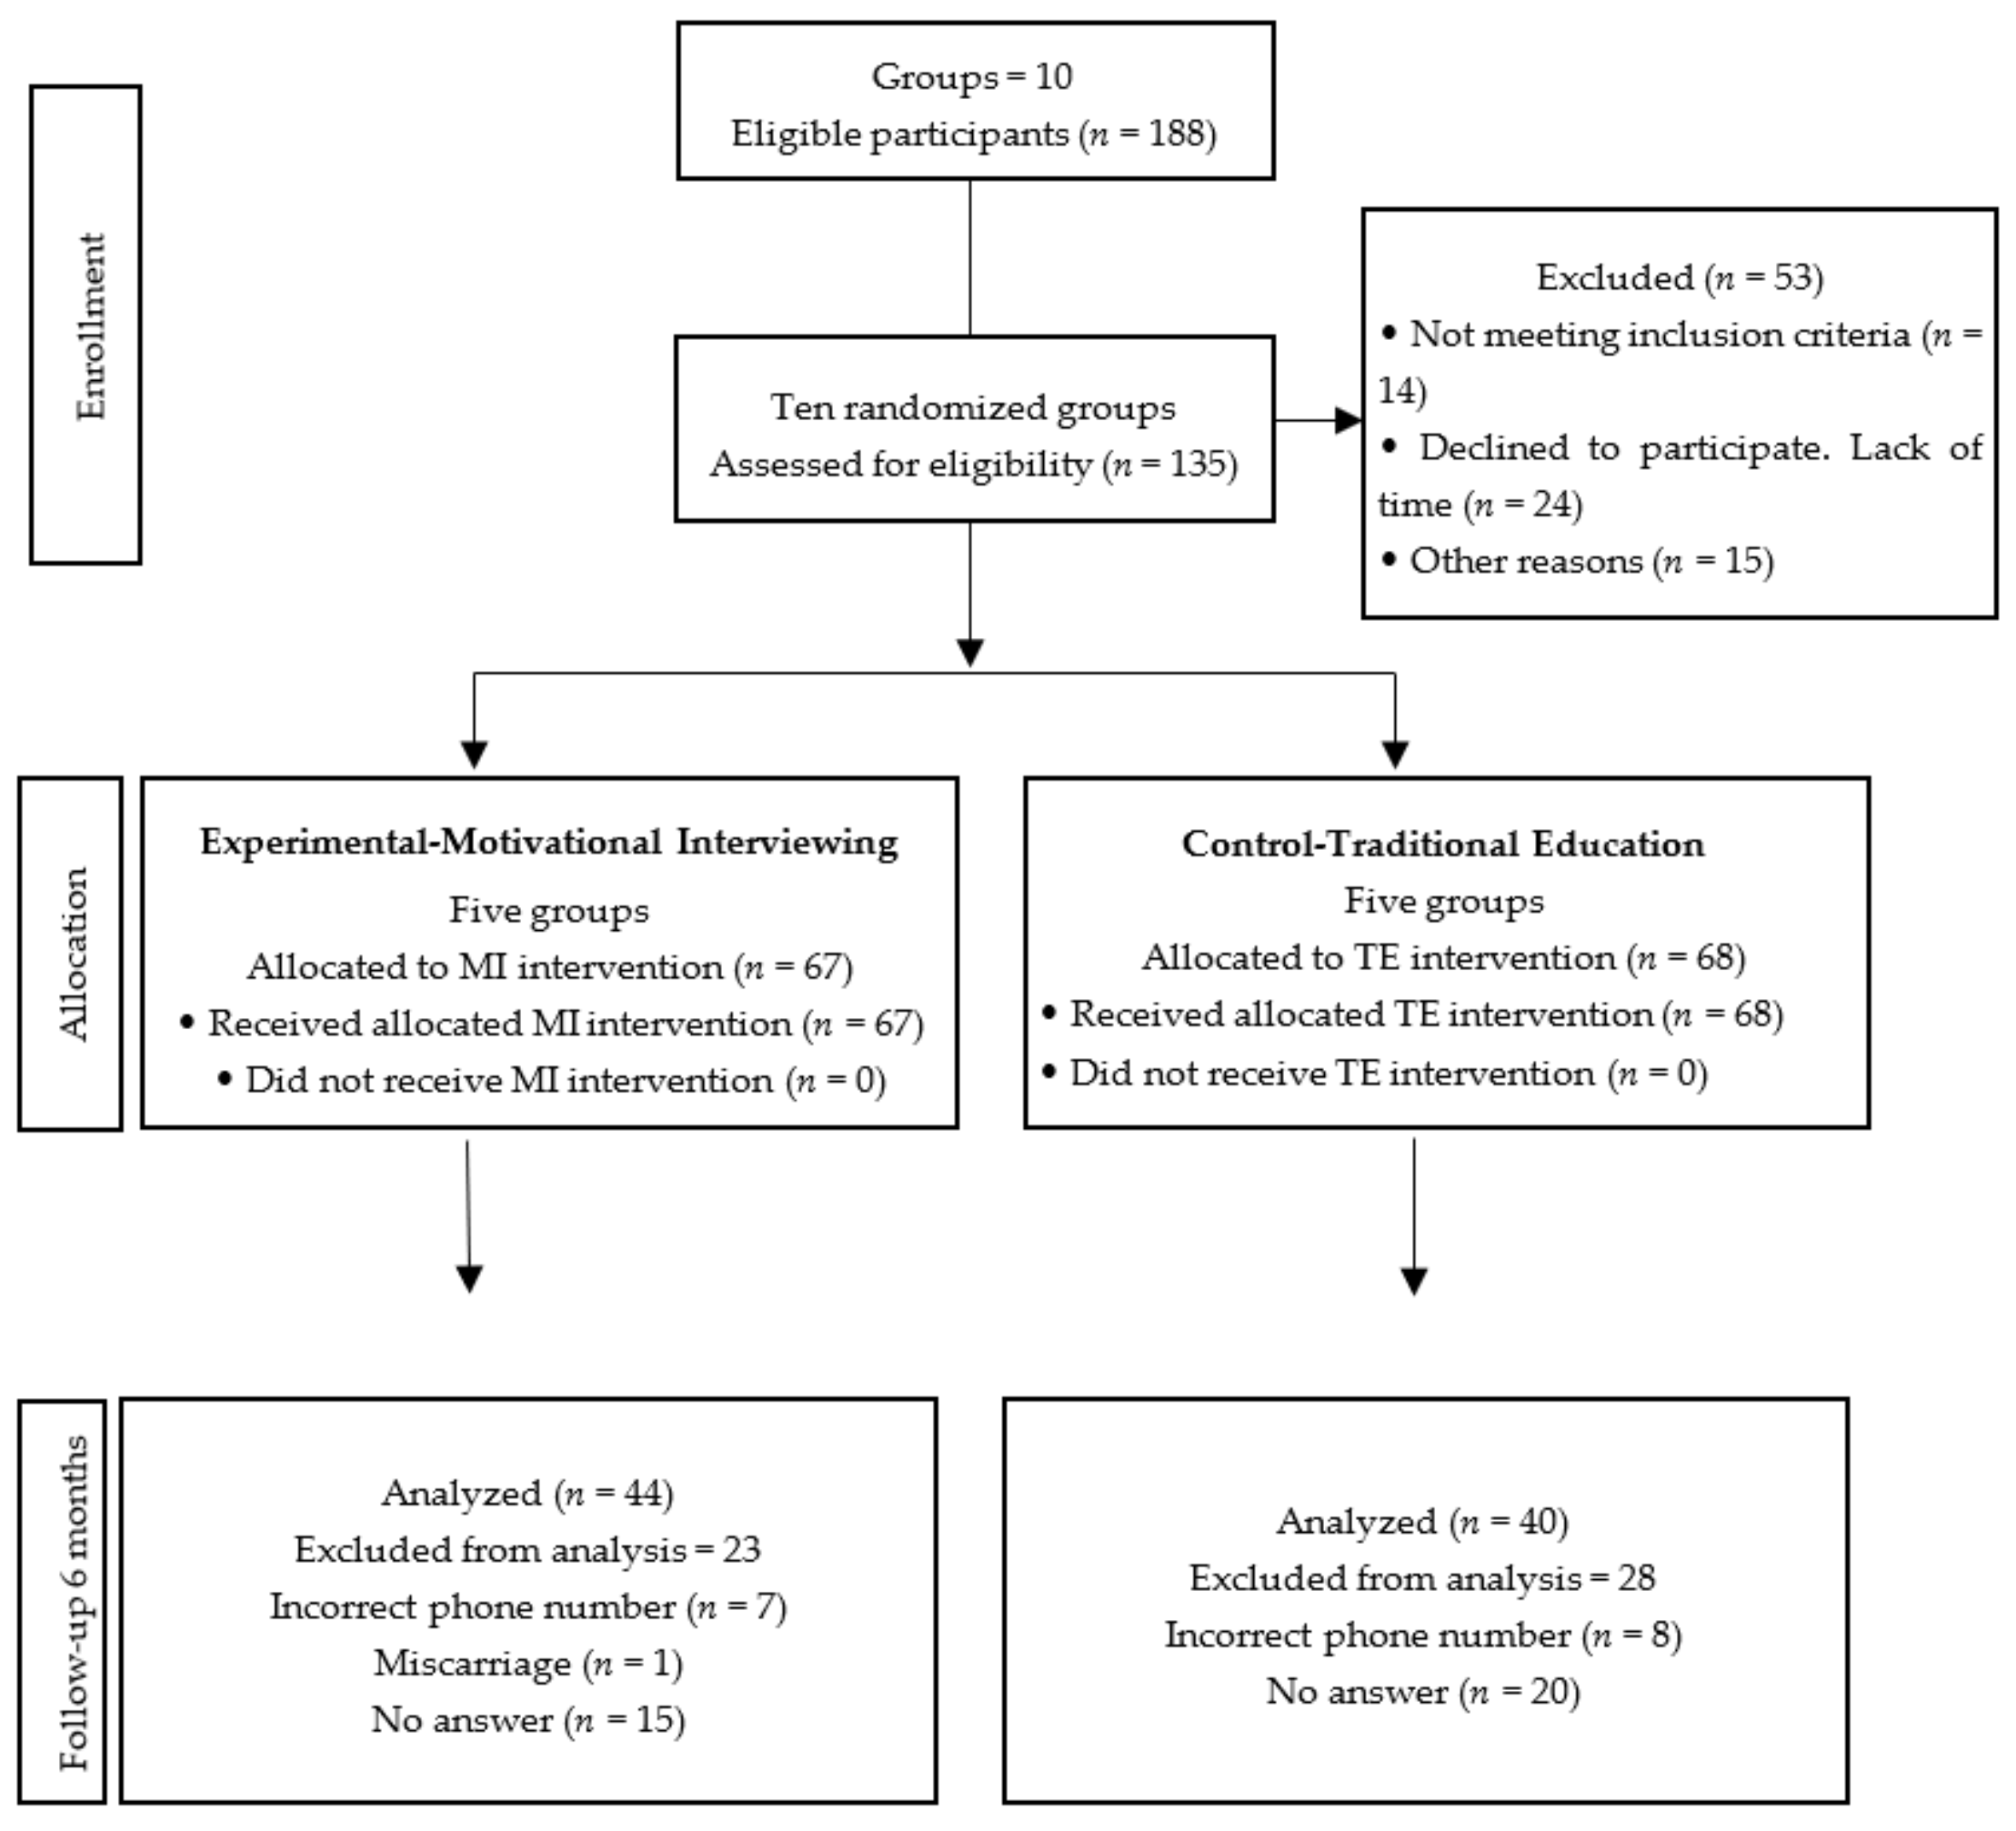 Healthcare | Free Full-Text | Impact of a Maternal Motivational  Interviewing on Oral Health in the Mother-Child Dyad